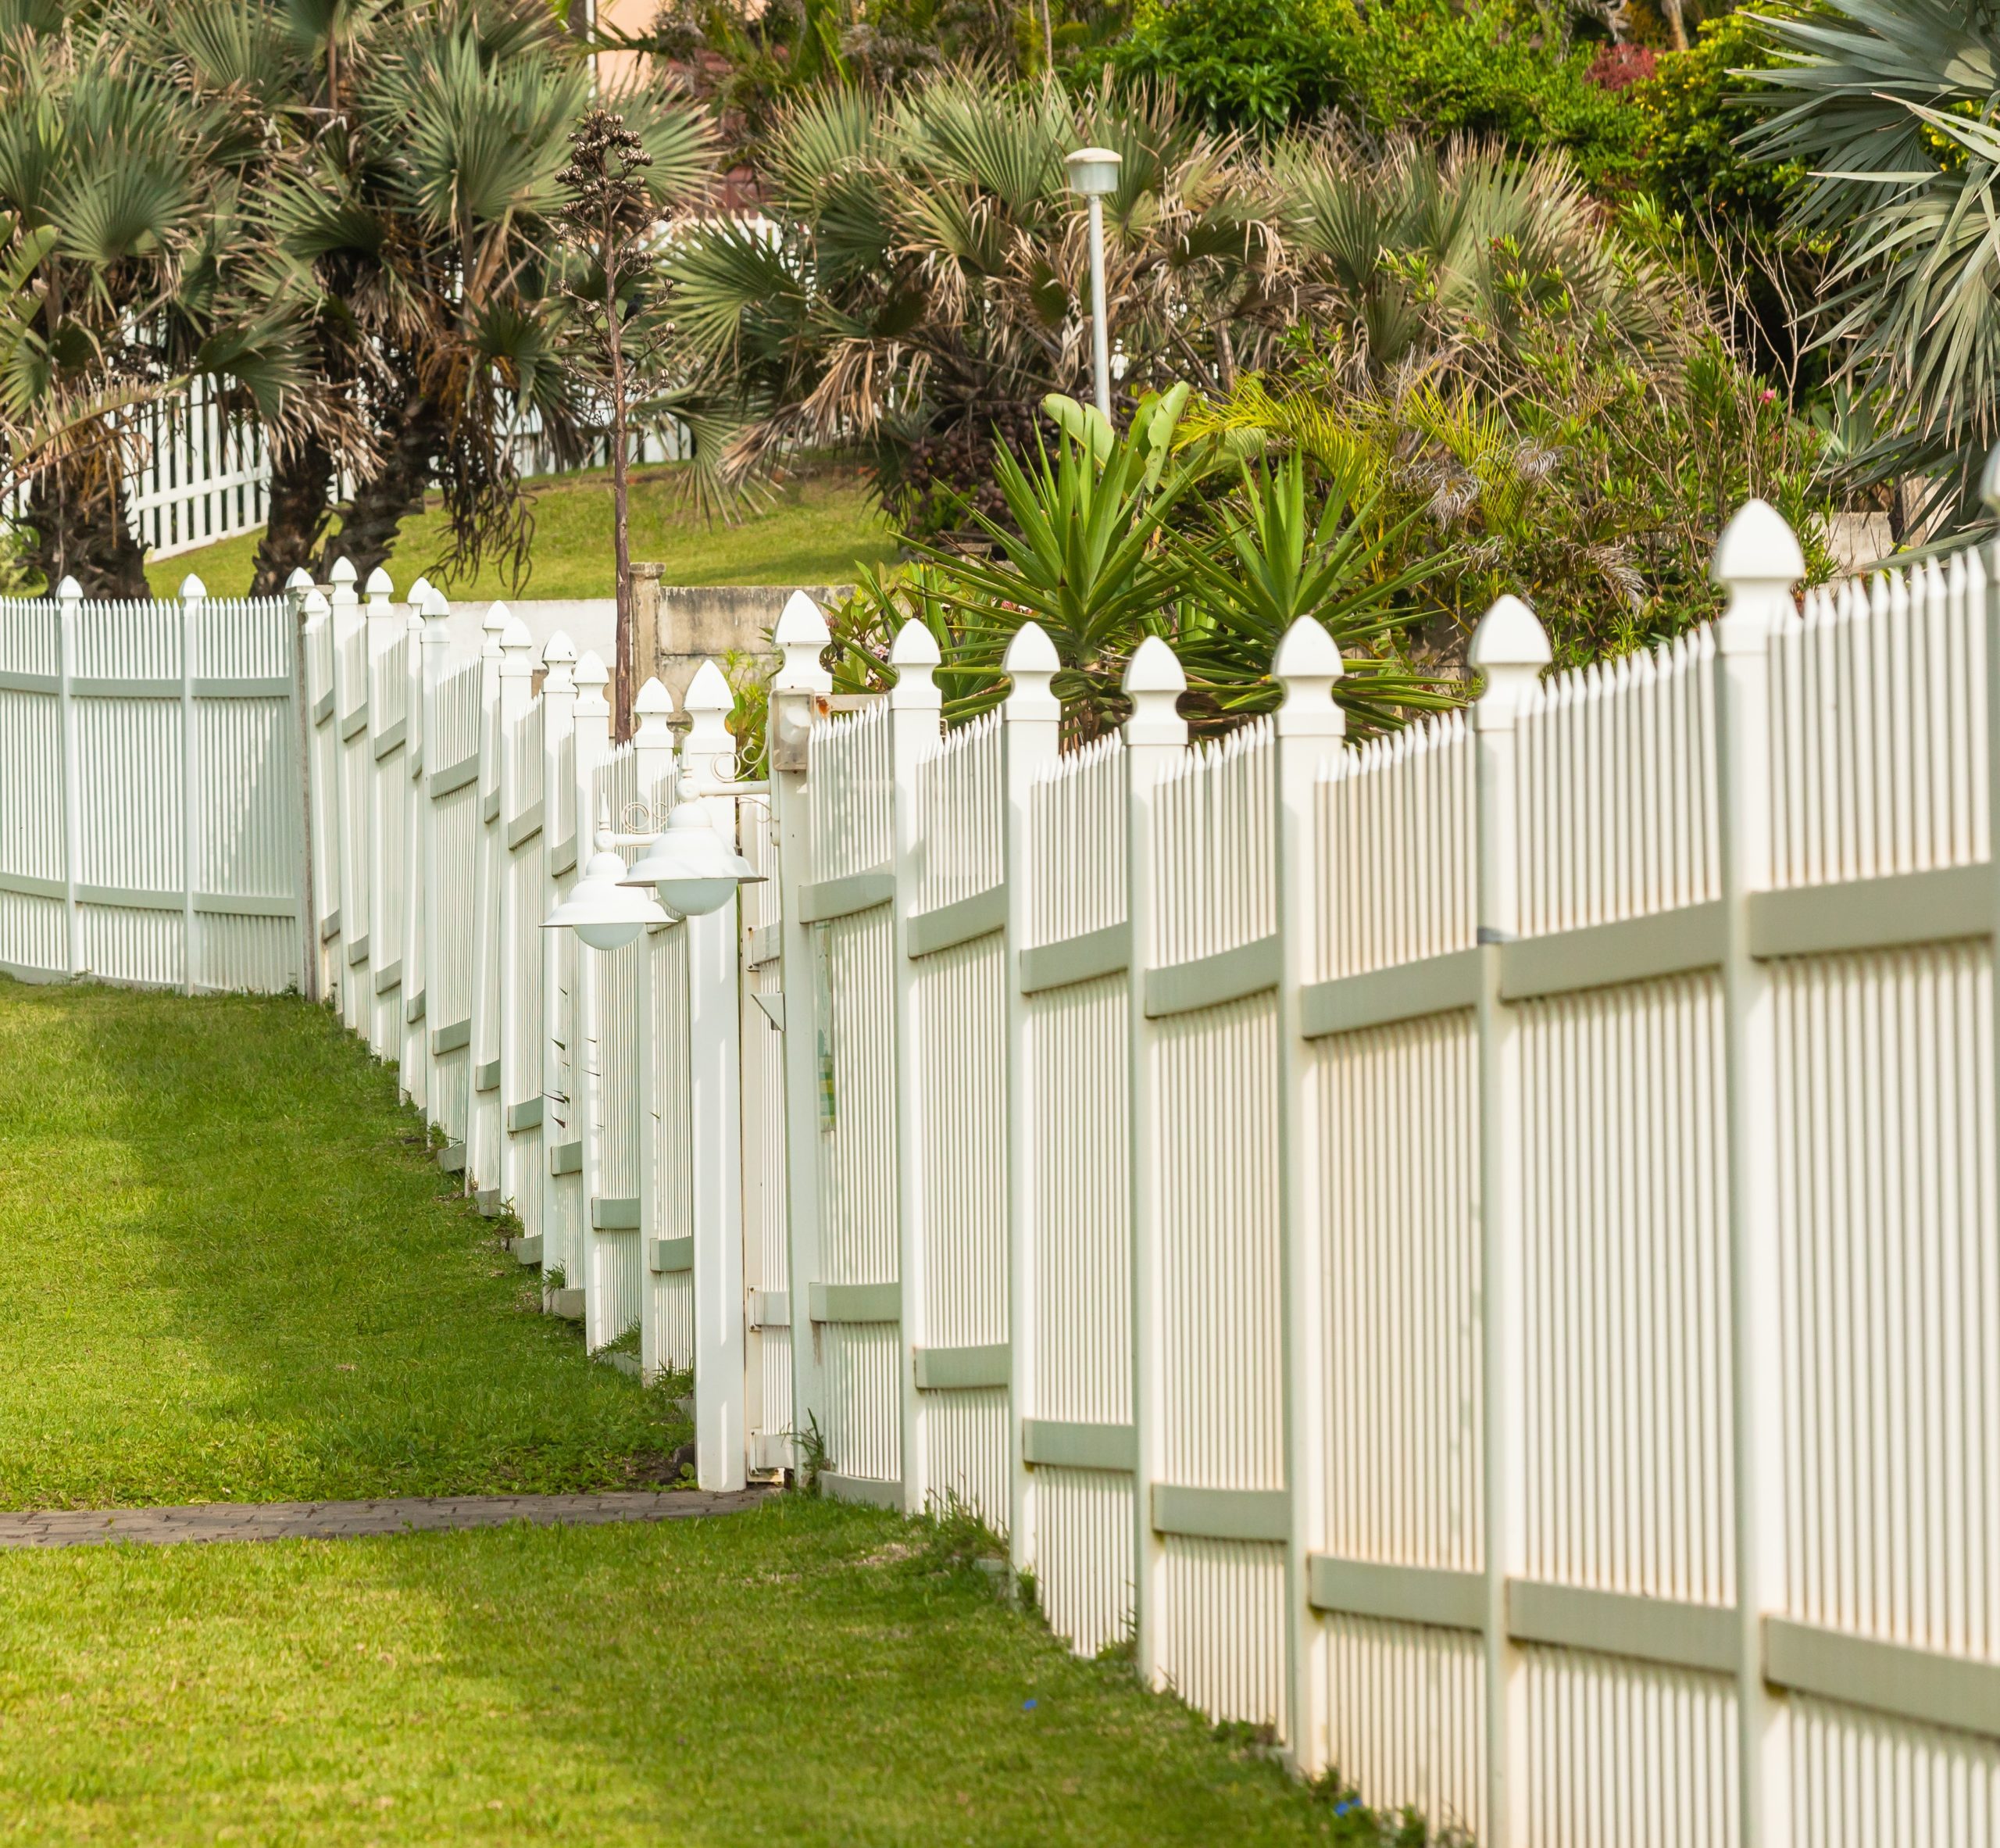 Vinyl or Wood Fence? A Comparison of Price and Maintenance